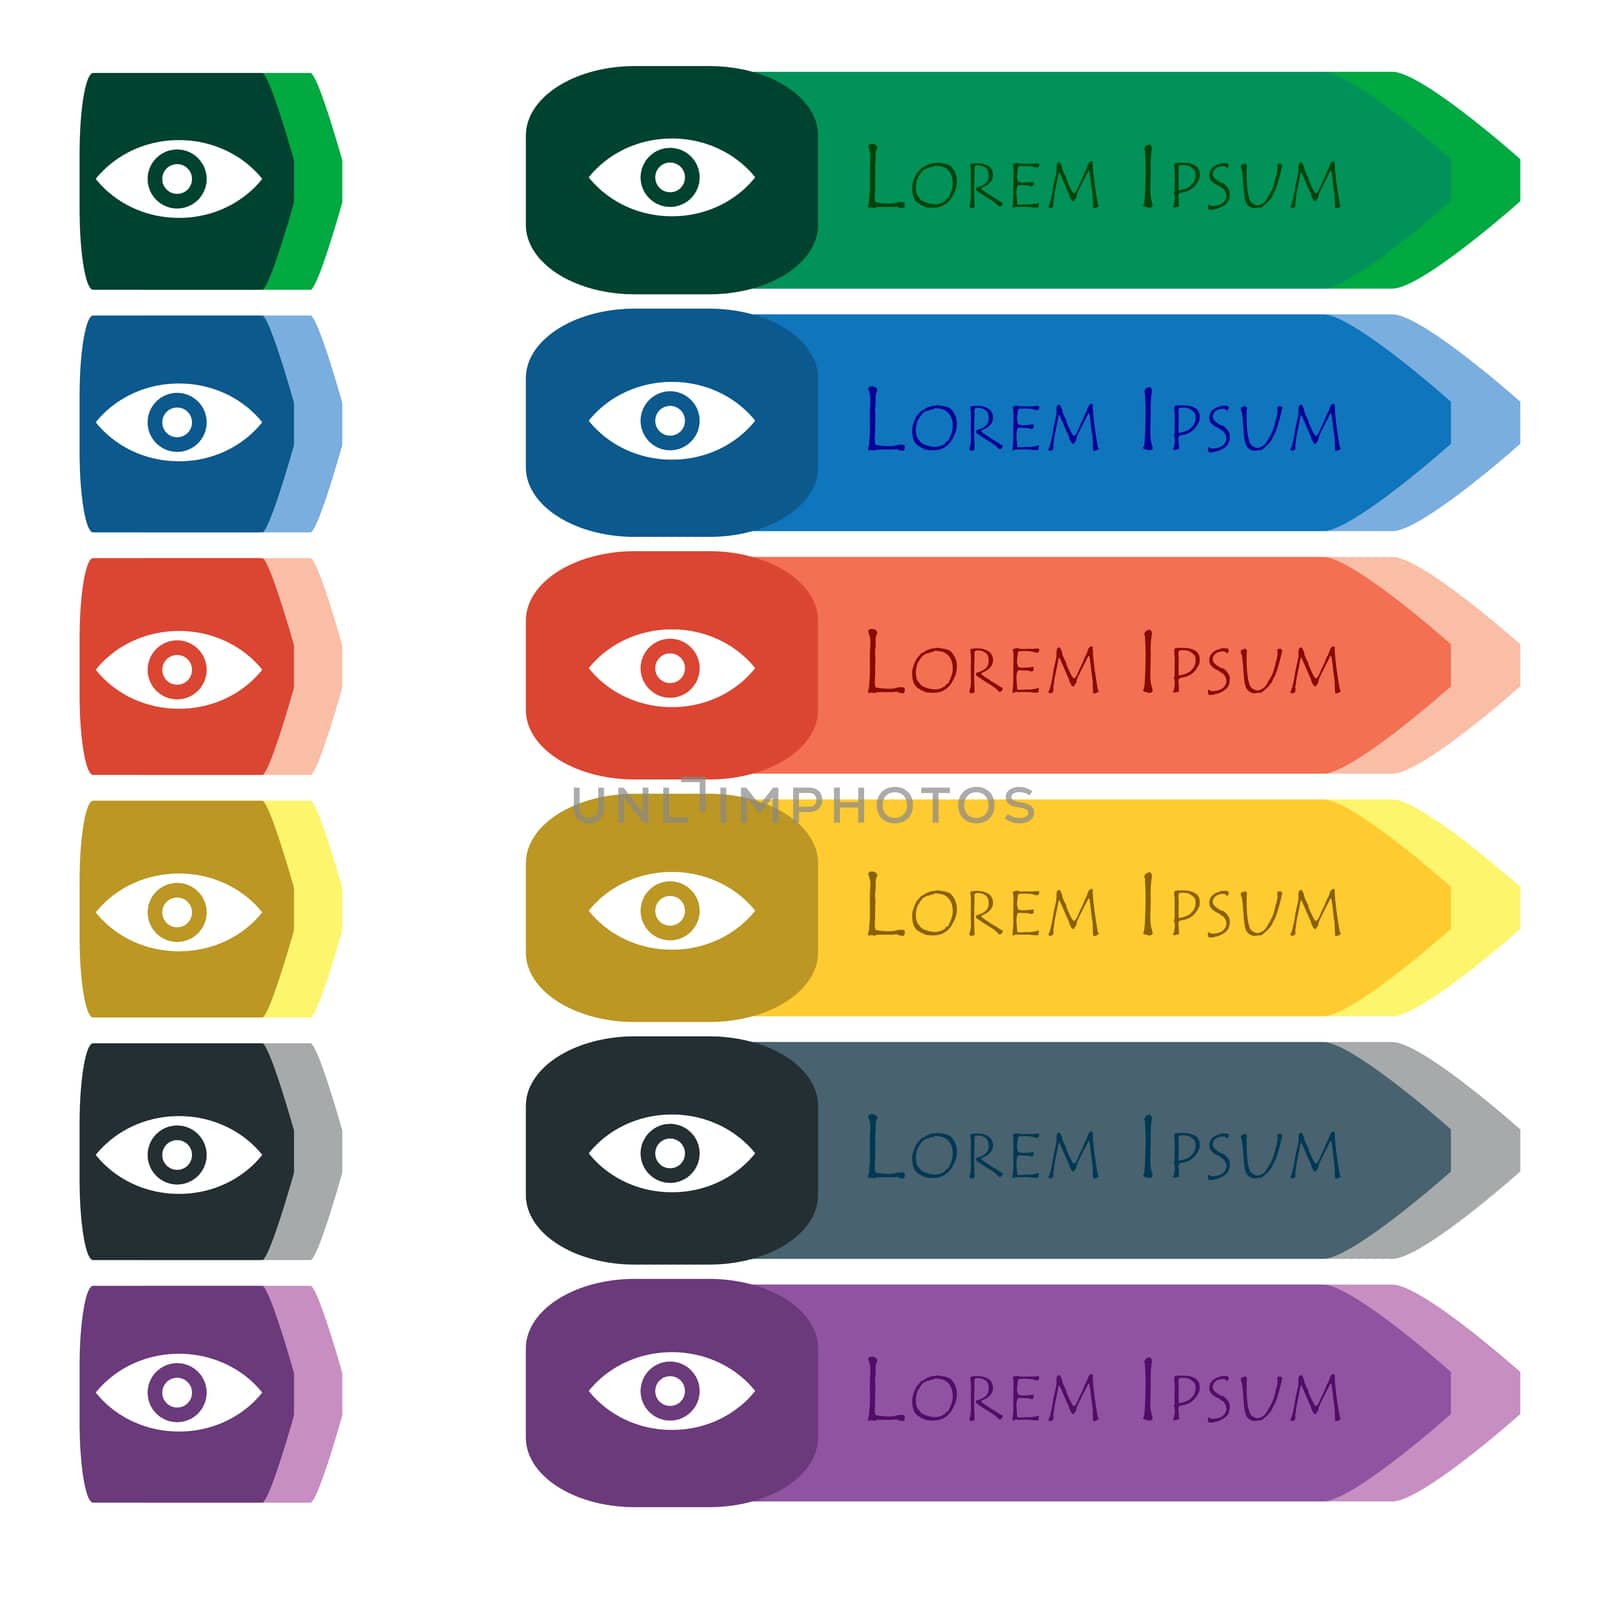 Eye, Publish content, sixth sense, intuition icon sign. Set of colorful, bright long buttons with additional small modules. Flat design by serhii_lohvyniuk